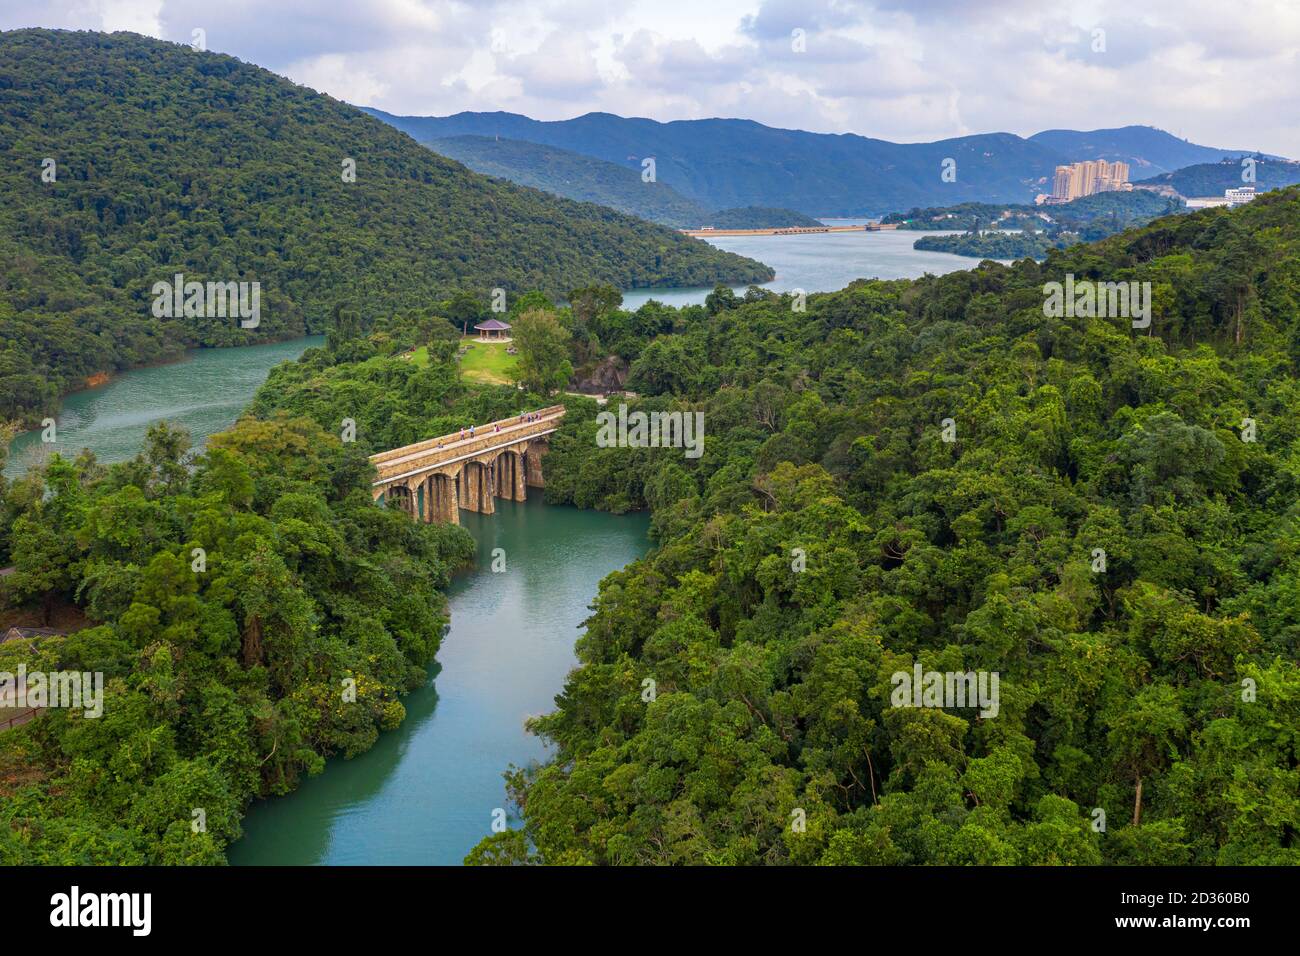 Aerial view of reservoir landscape Stock Photo